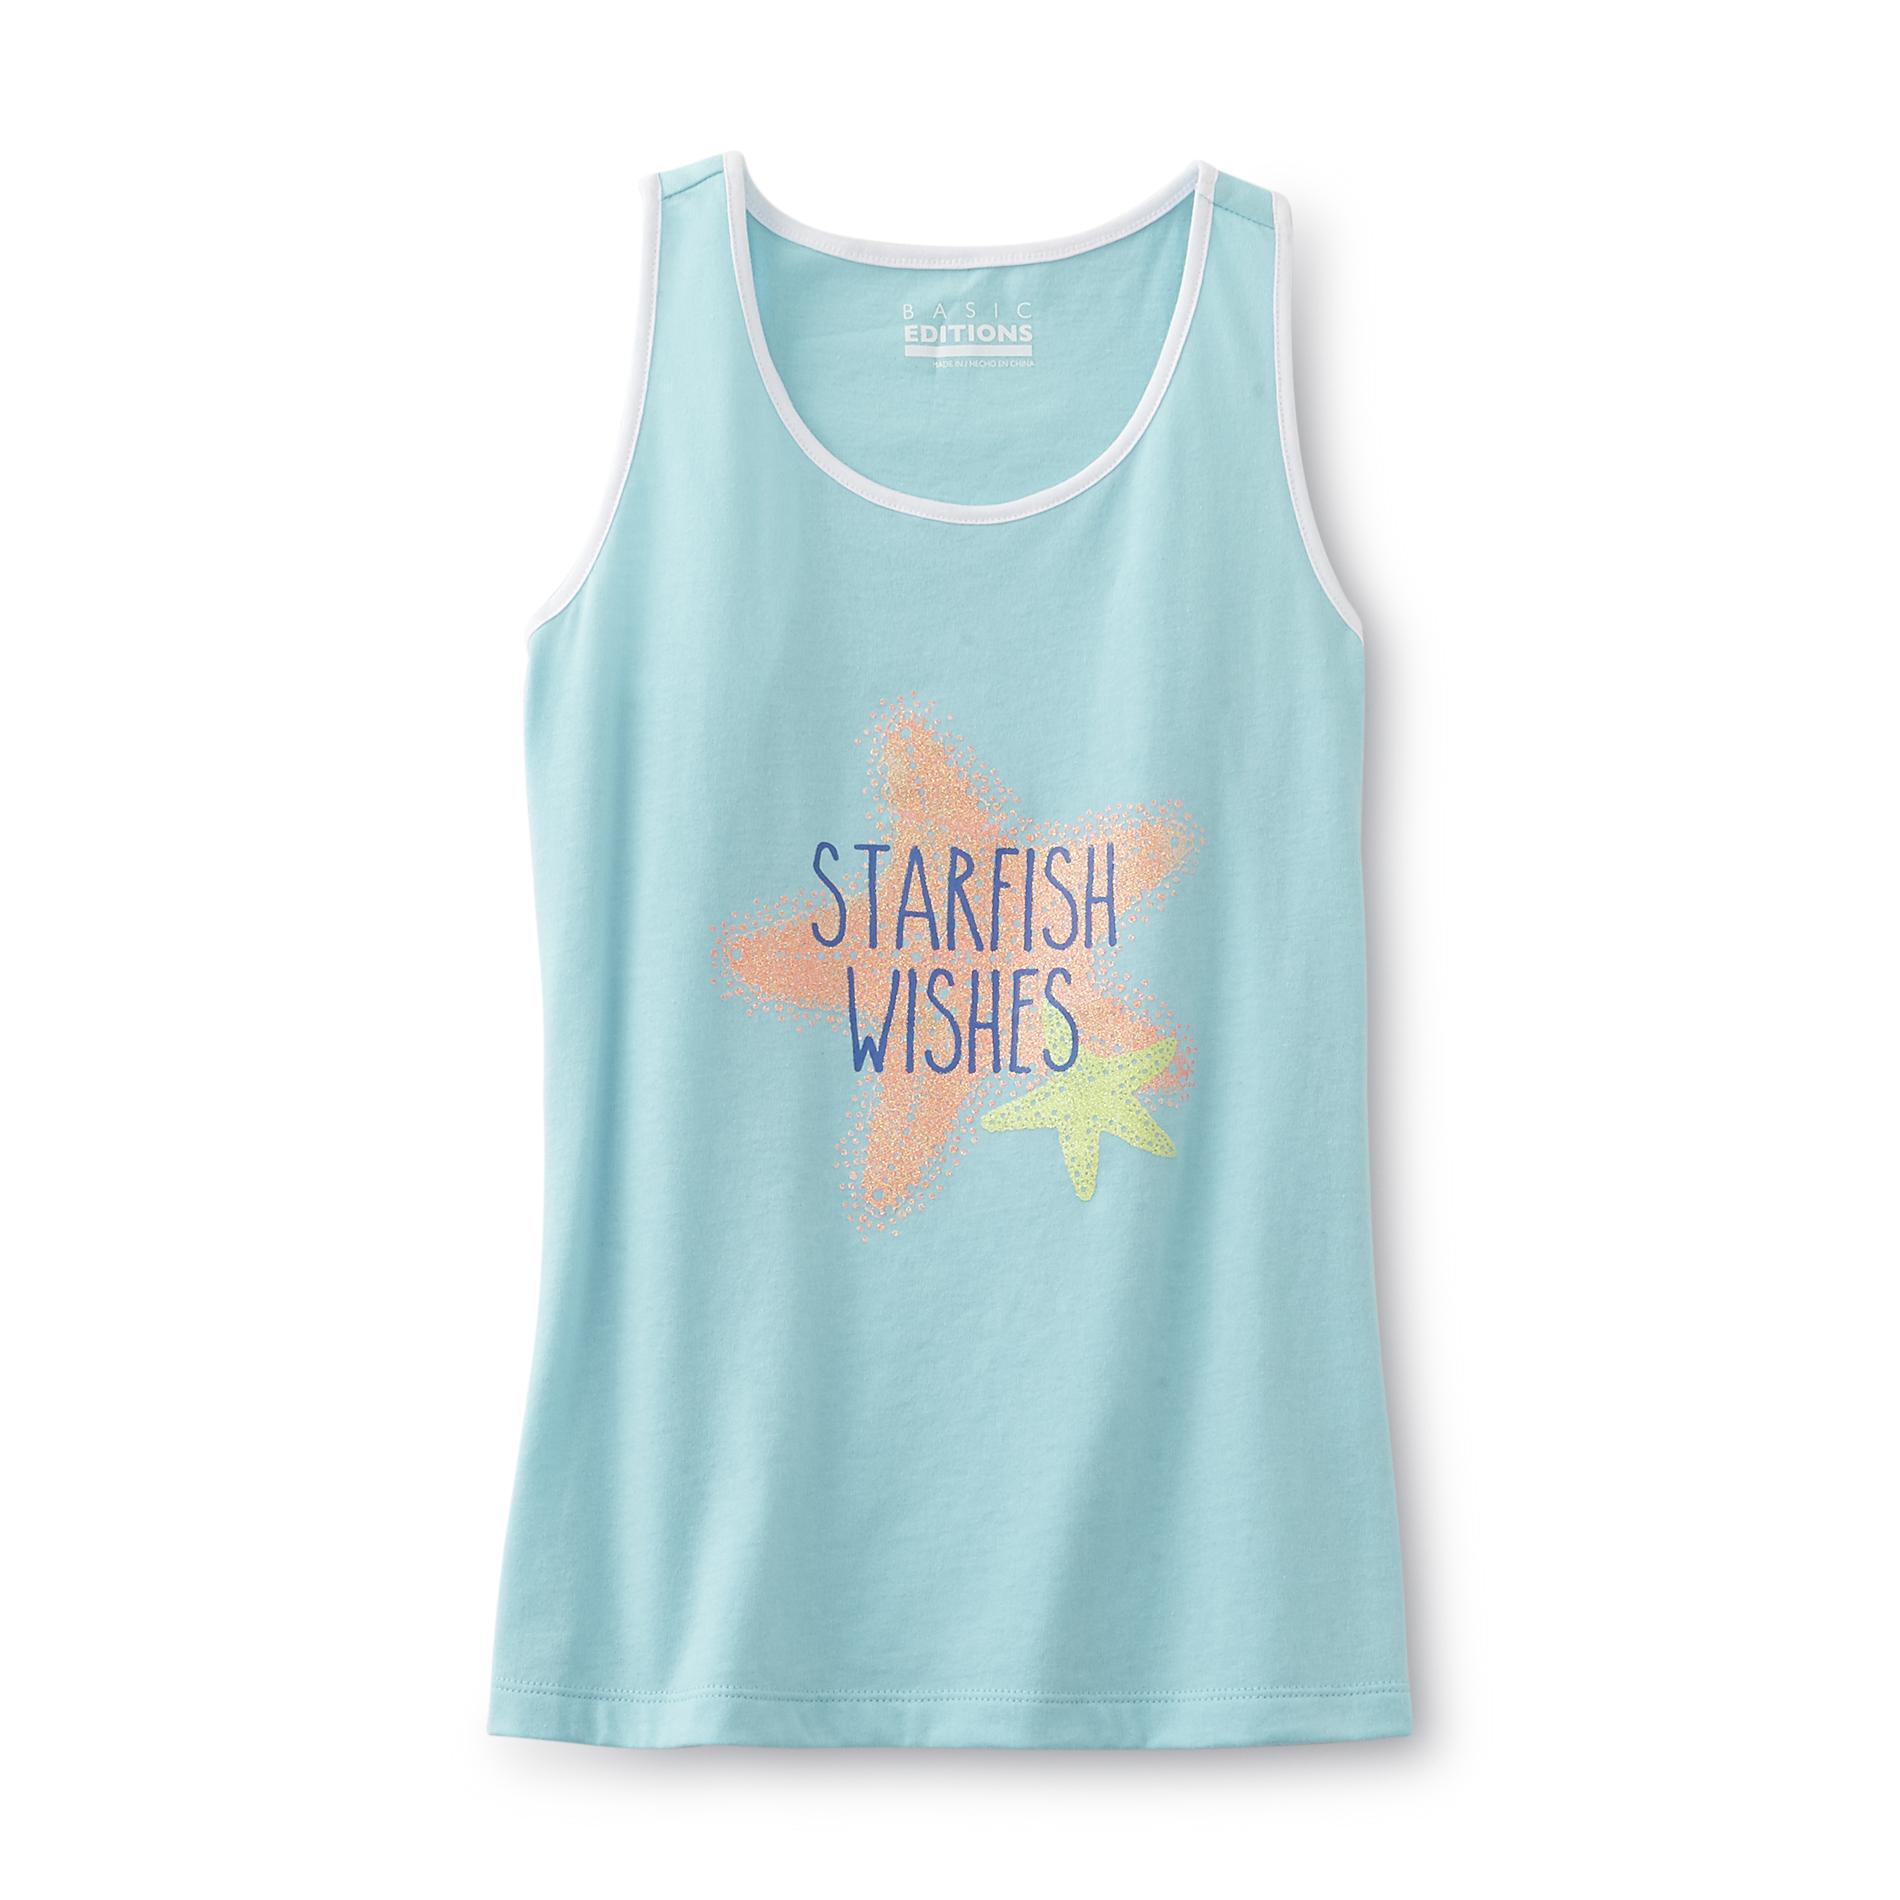 Basic Editions Girl's Graphic Tank Top - Starfish Wishes